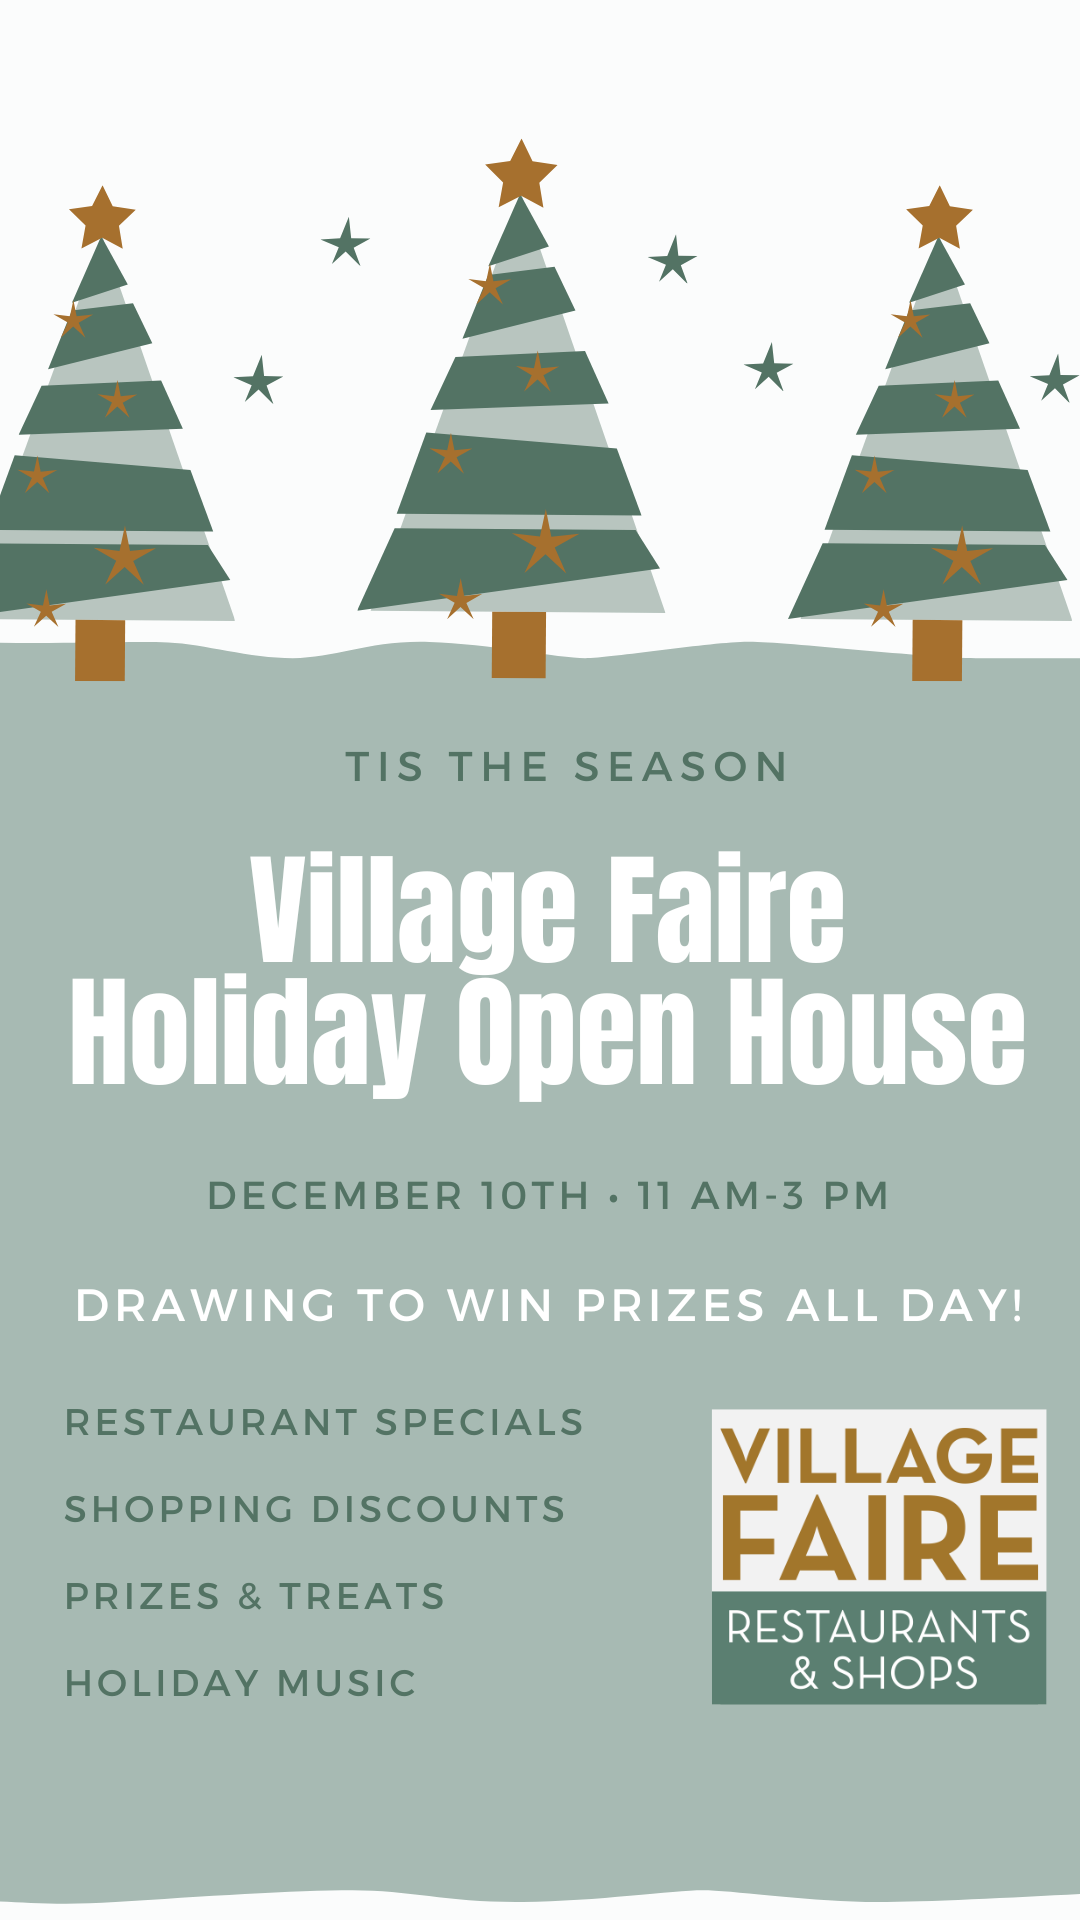 Village Faire Holiday Open House